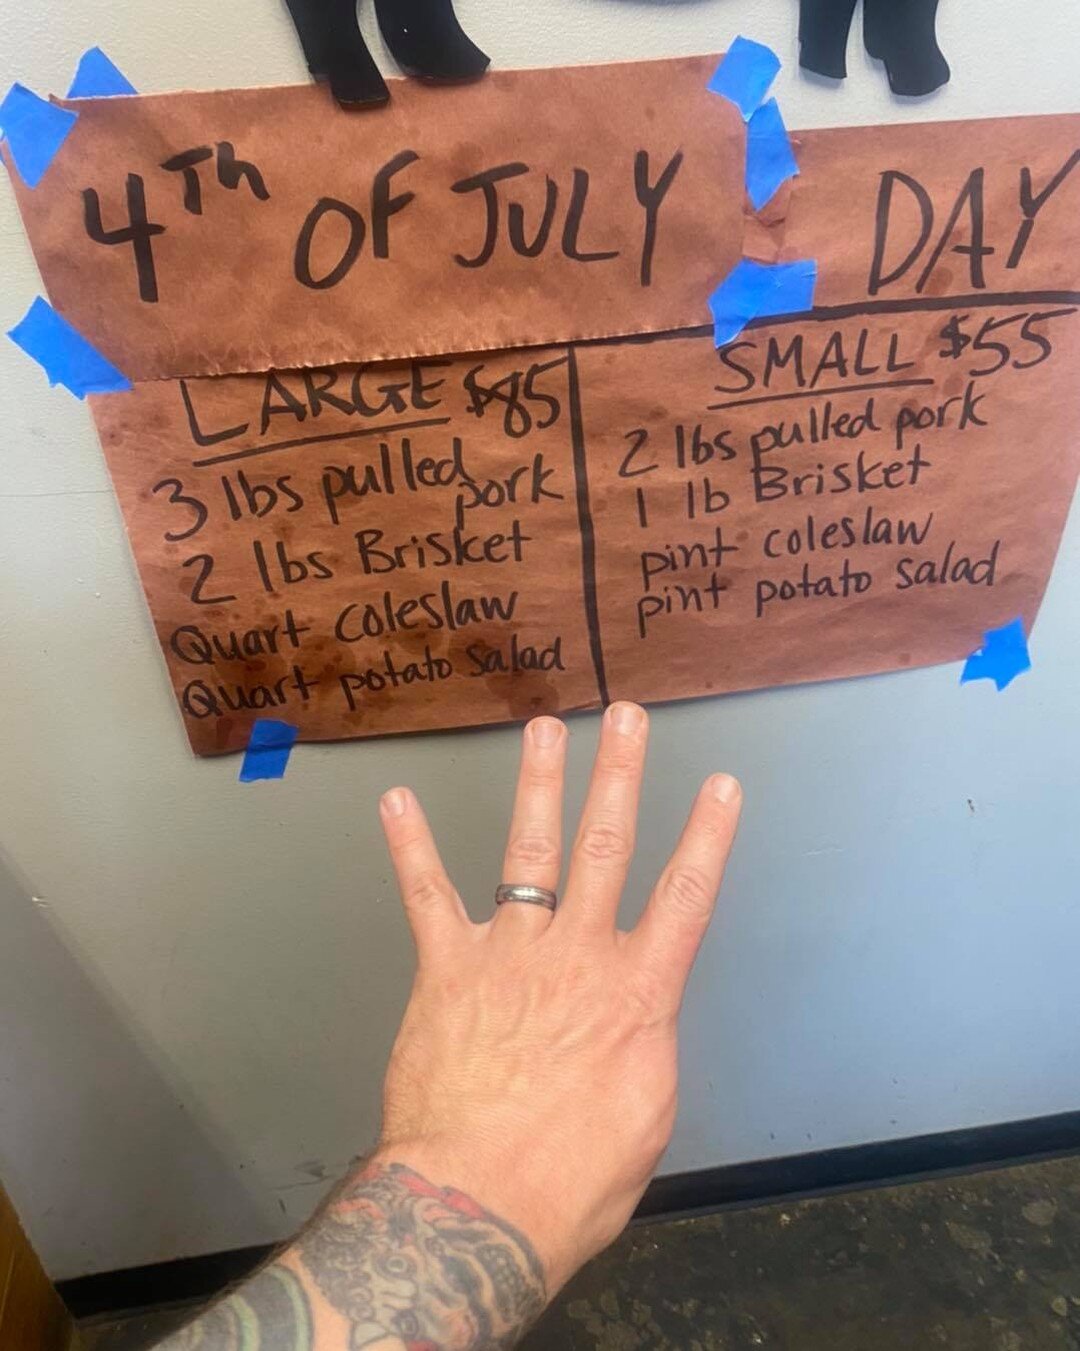 4 days left to get your 4th of July orders in.  Order at federalhillsmokehouse.com. 

Any other orders for the July 2 or 3 please call in sooner than later. We&rsquo;re filling up.